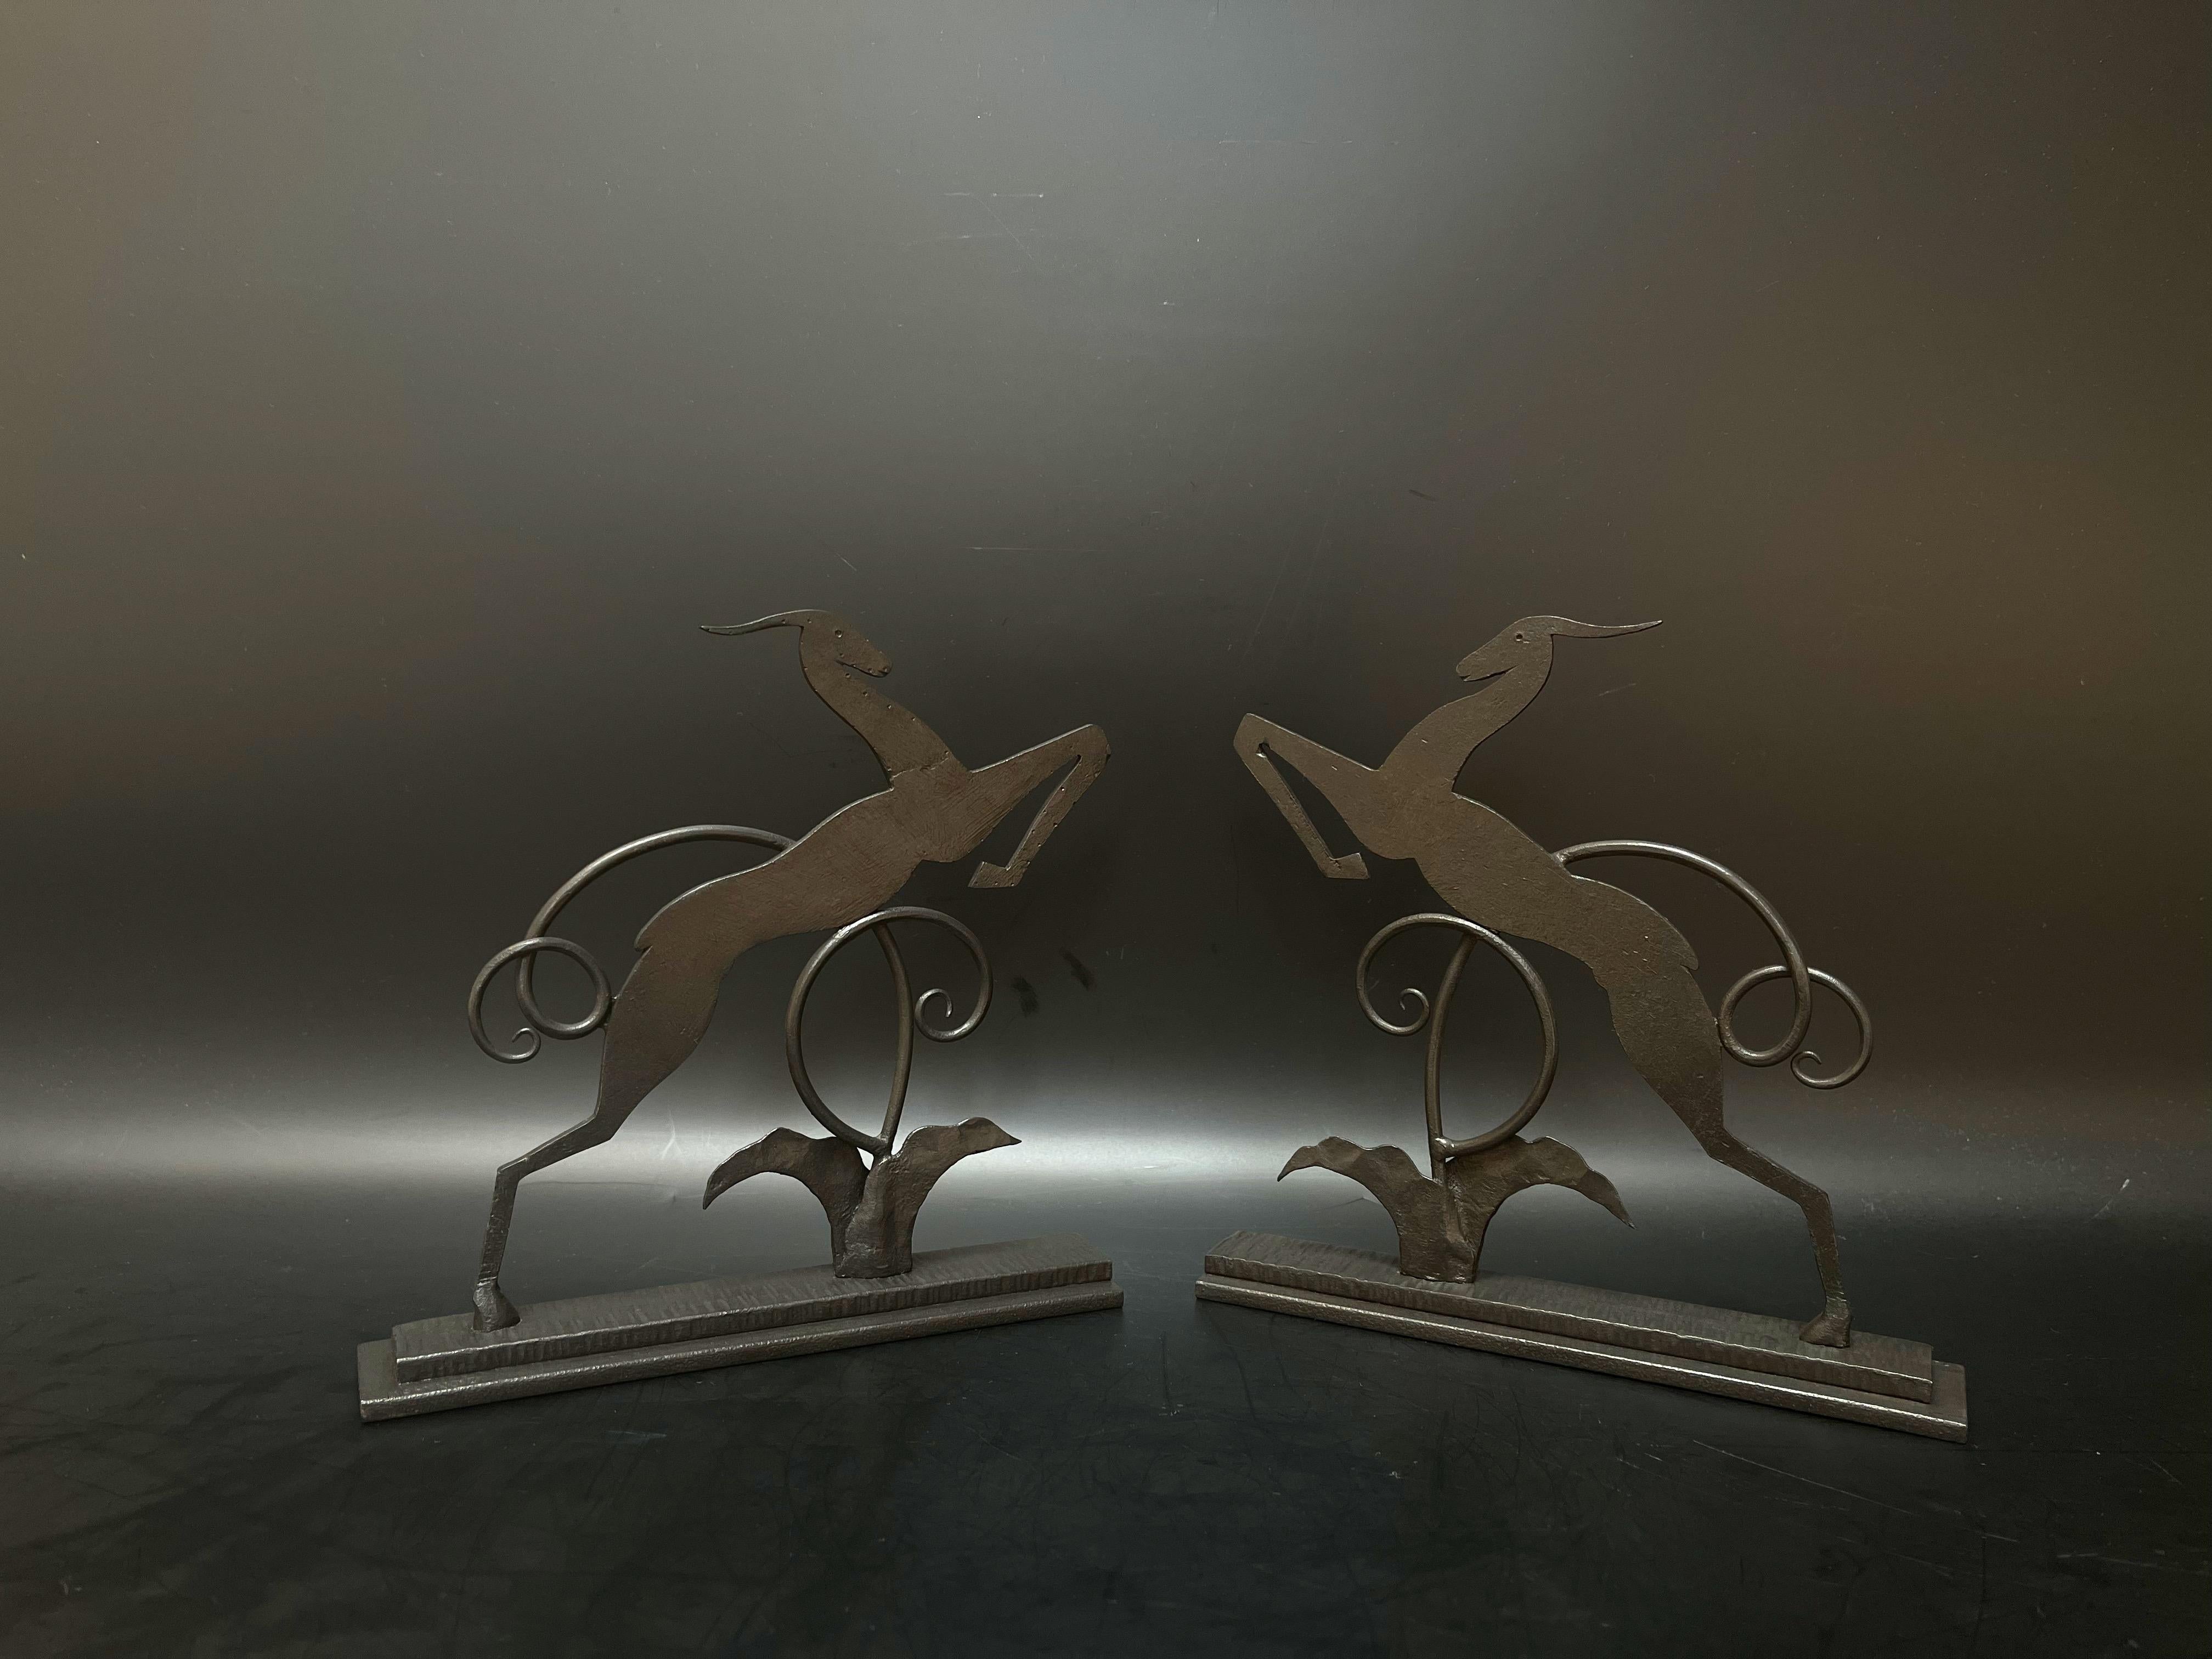 Pair of wrought iron bookends representing antelopes.
Stamped Zadounaisky.
In very good condition.

Height: 19cm
Length: 19cm
Thickness: 4cm
Total weight: 1.3 Kg

Michel Zadounaïsky, born March 10, 1903 in Ekaterinodar and died in La Hauteville in